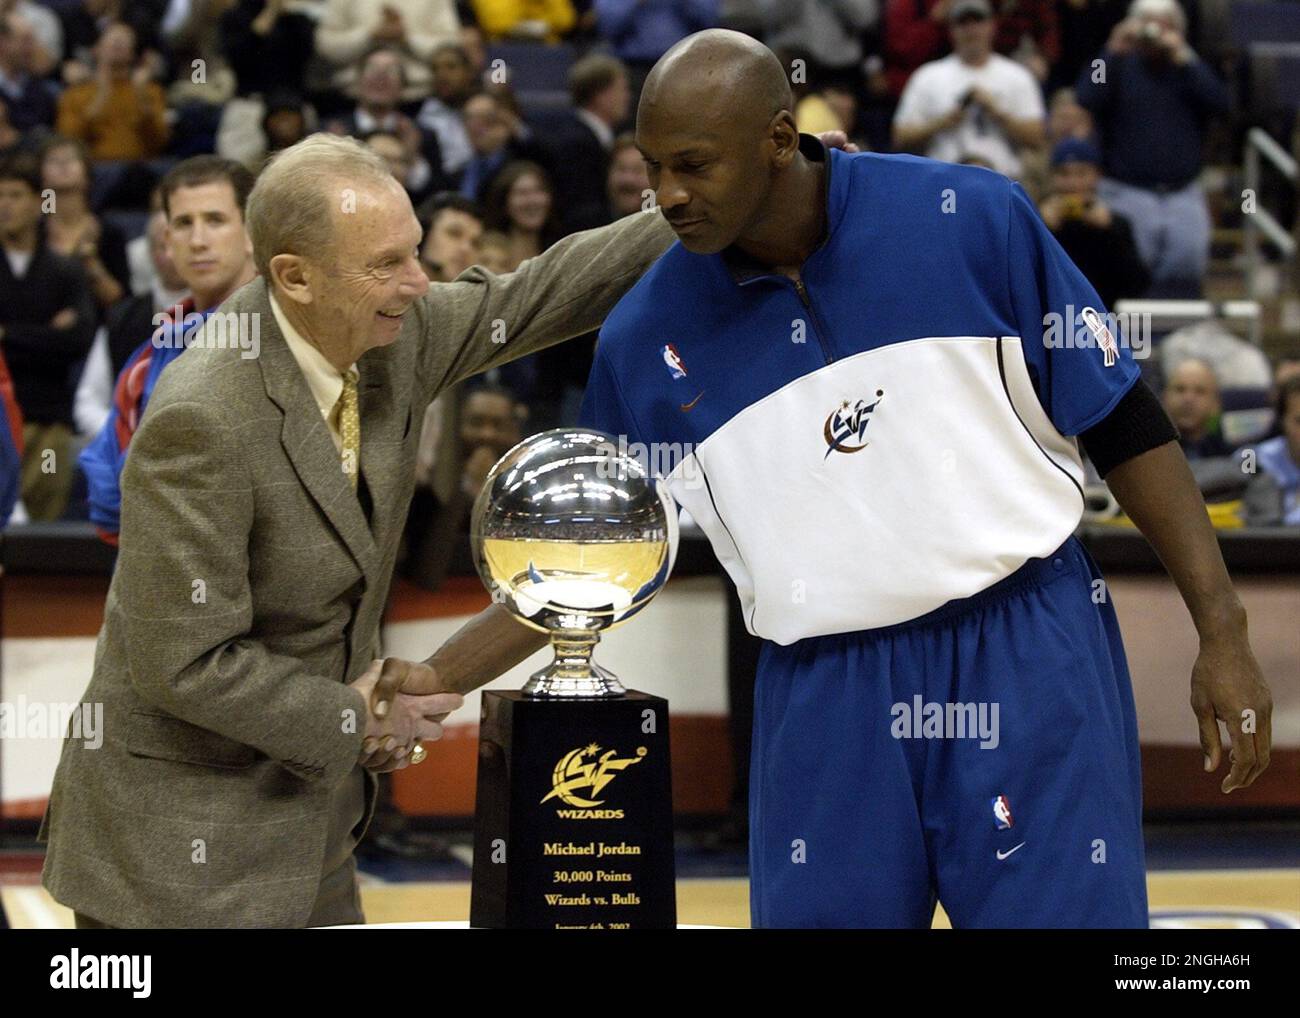 Washington Wizards' chairman of the board Abe Pollin, left, shakes hands with Wizards' Michael Jordan, right, as he presented Jordan with a trophy that commemorated his 30, 000 point scoring milestone during the halftime of their game against the Los Angeles Clippers, Tuesday, Jan. 8, 2002, at the MCI Center in Washington. The Wizards won 96-88.(AP Photo/Nick Wass) Stock Photo